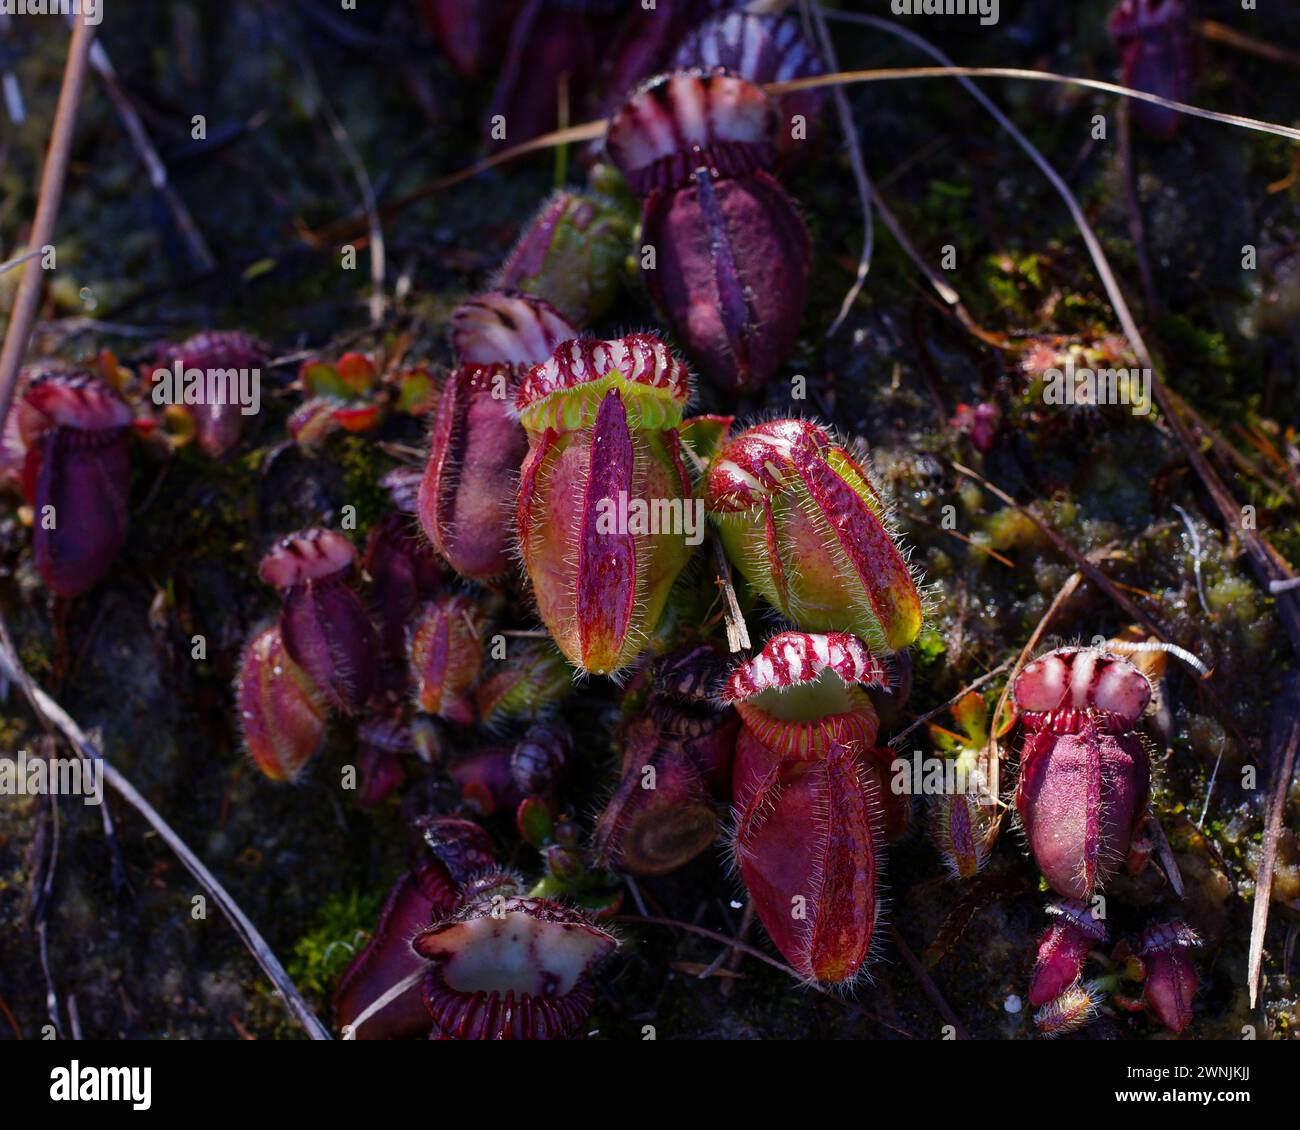 Albany pitcher plant (Cephalotus follicularis) with red pitchers in natural habitat, Western Australia Stock Photo